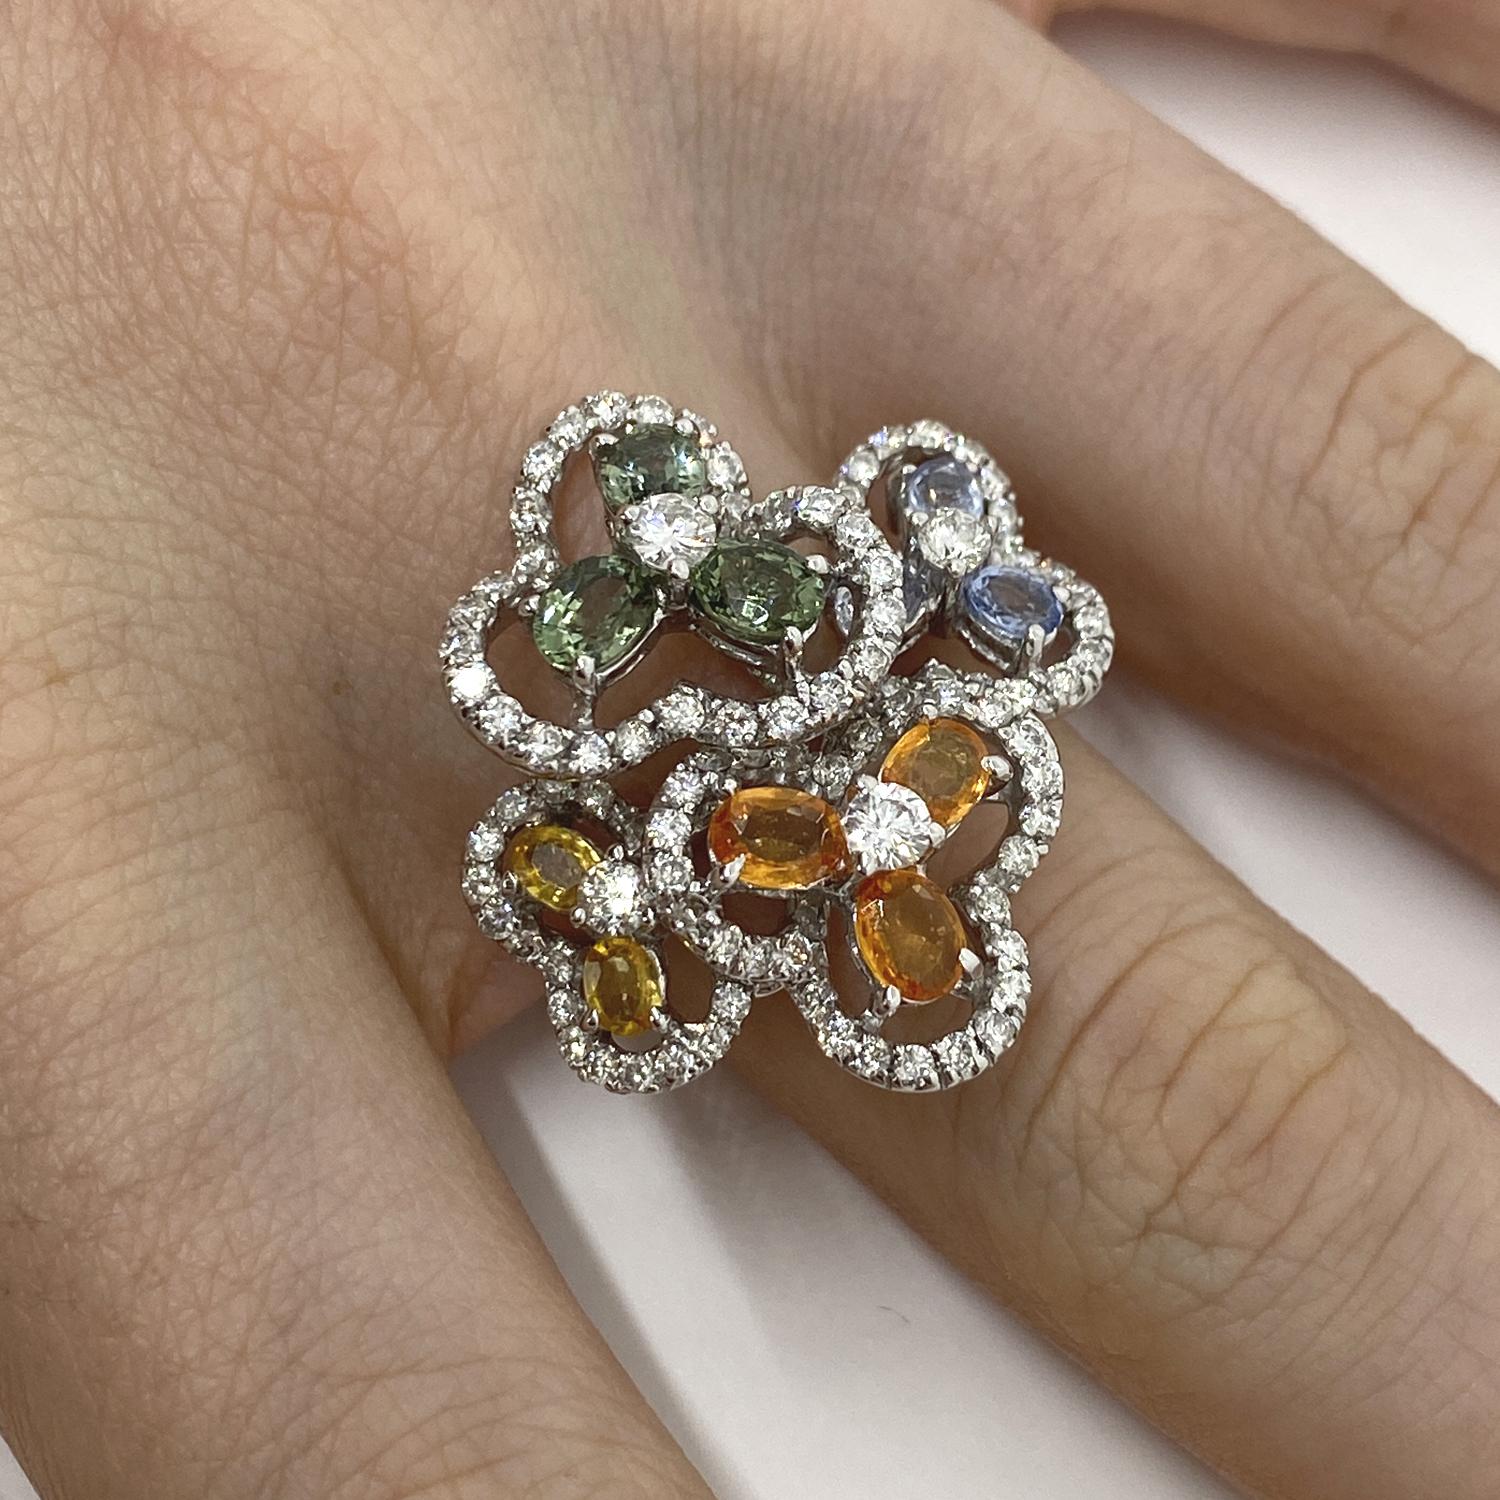 Ring made of 18kt white gold with drop-cut natural sapphires for ct.2.48 and natural white brilliant-cut diamonds for ct.1.56

Welcome to our jewelry collection, where every piece tells a story of timeless elegance and unparalleled craftsmanship. As